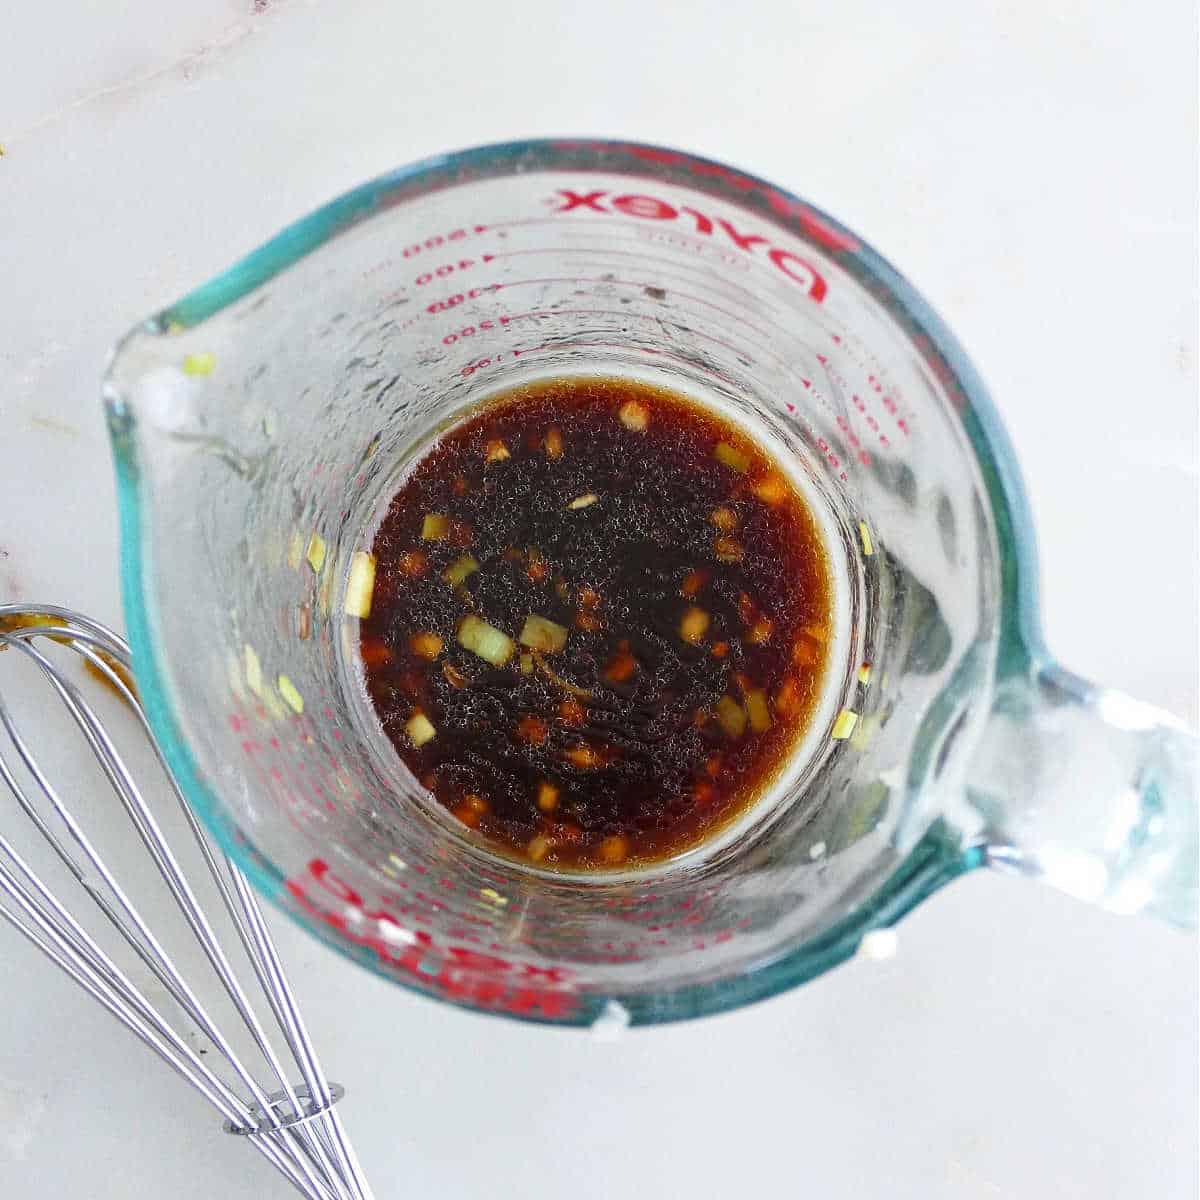 sesame soy dipping sauce whisked in a glass measuring cup